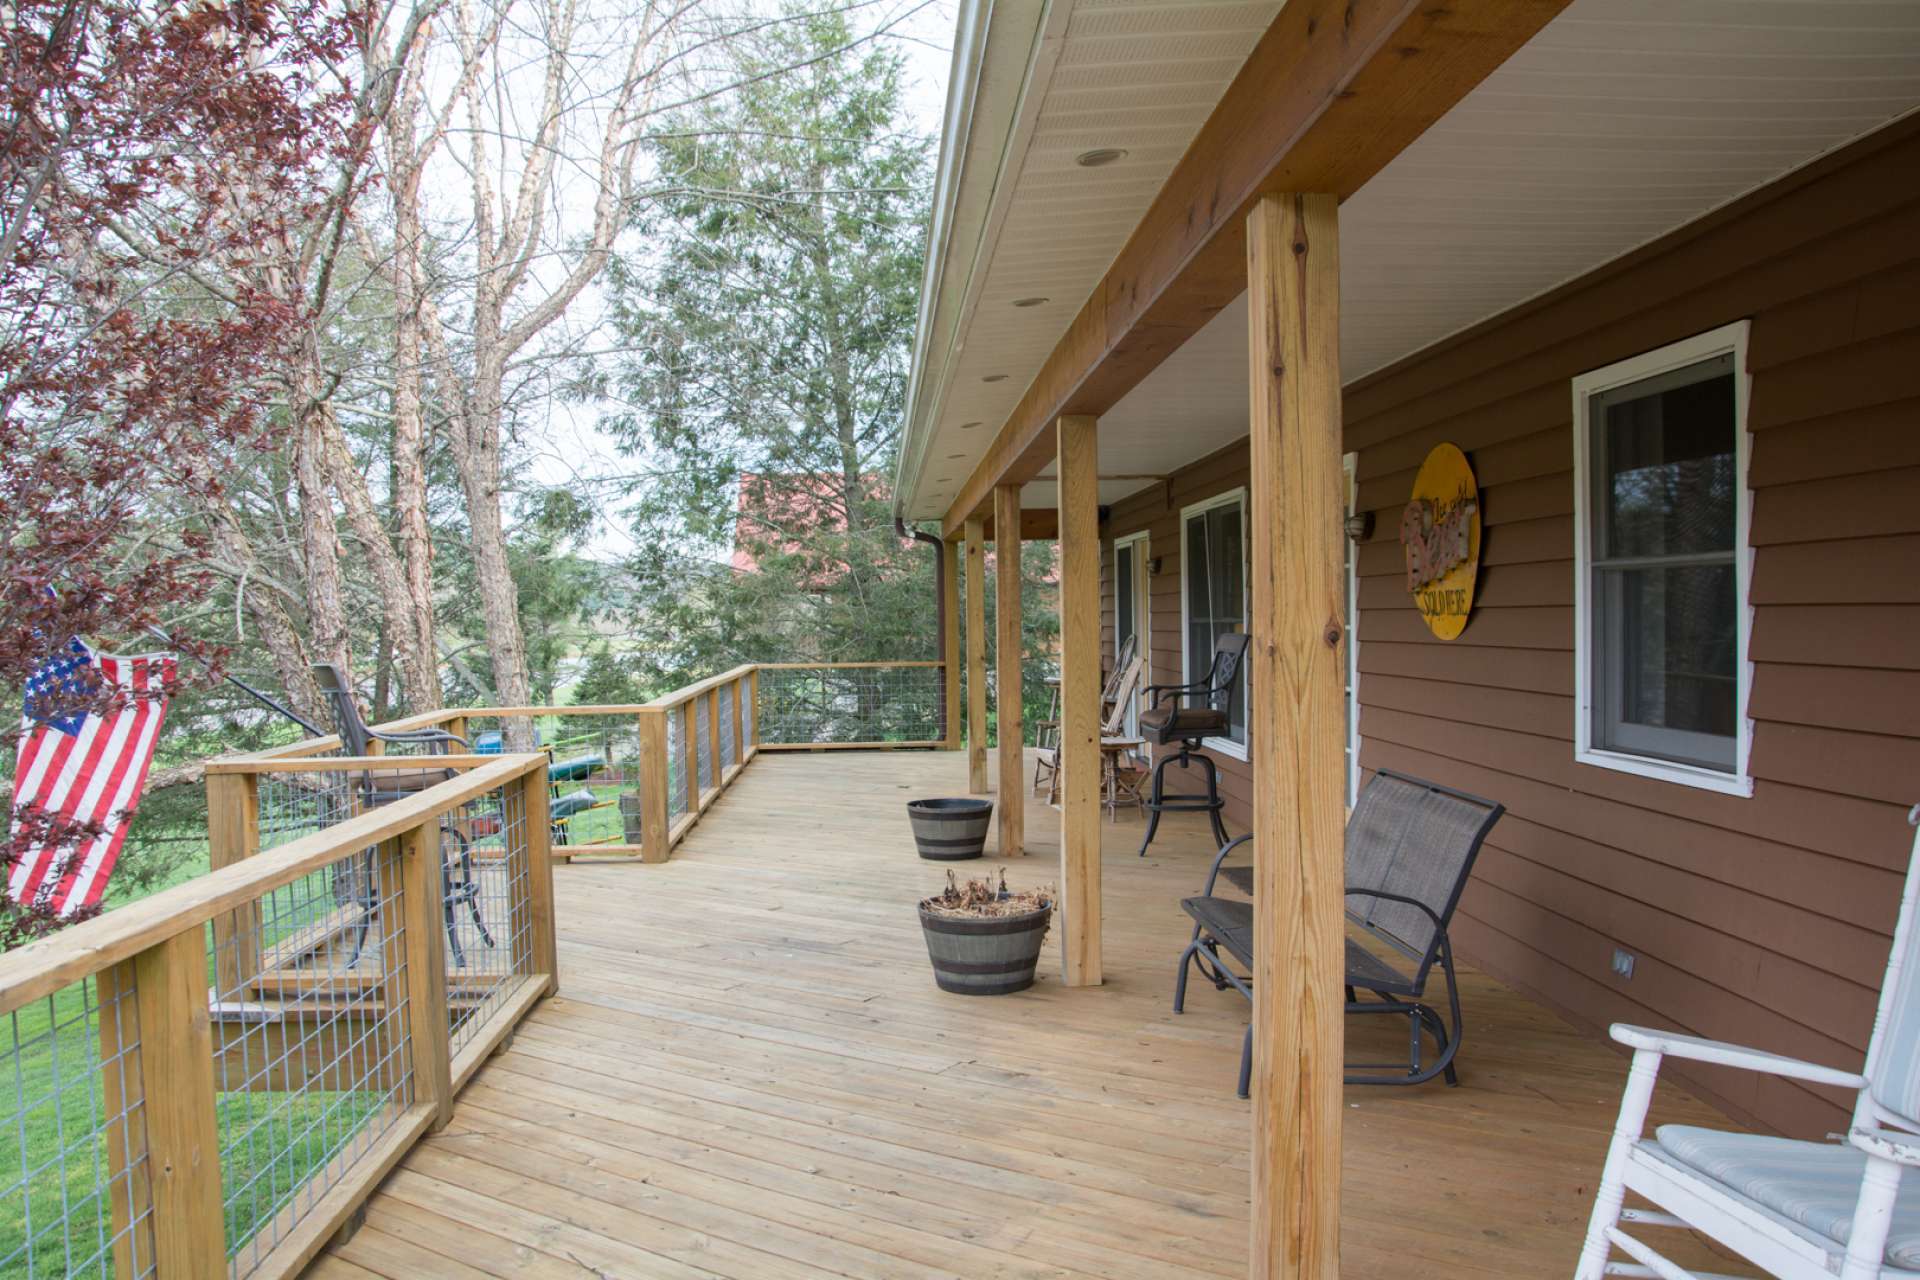 During the warmer months, the open back deck expands the living and dining space.